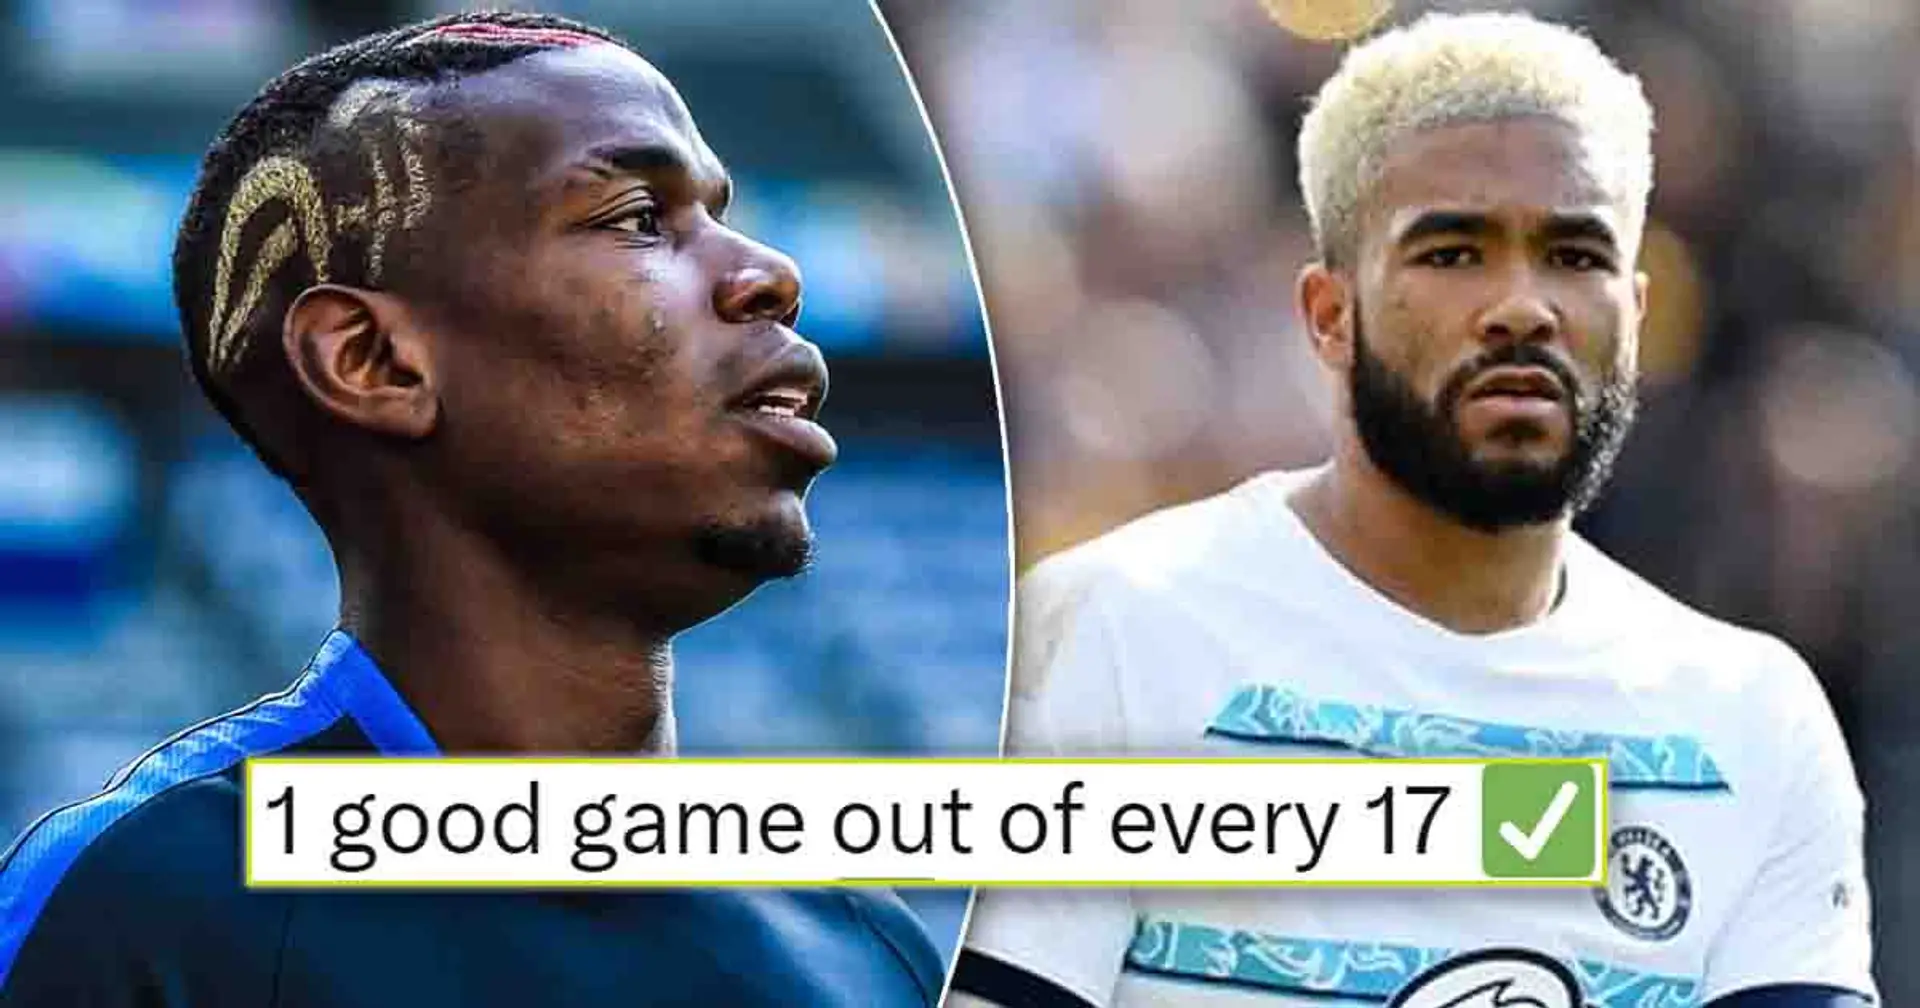 'More hairstyles than successive games played': Fan names 5 reasons why James is turning into next Pogba